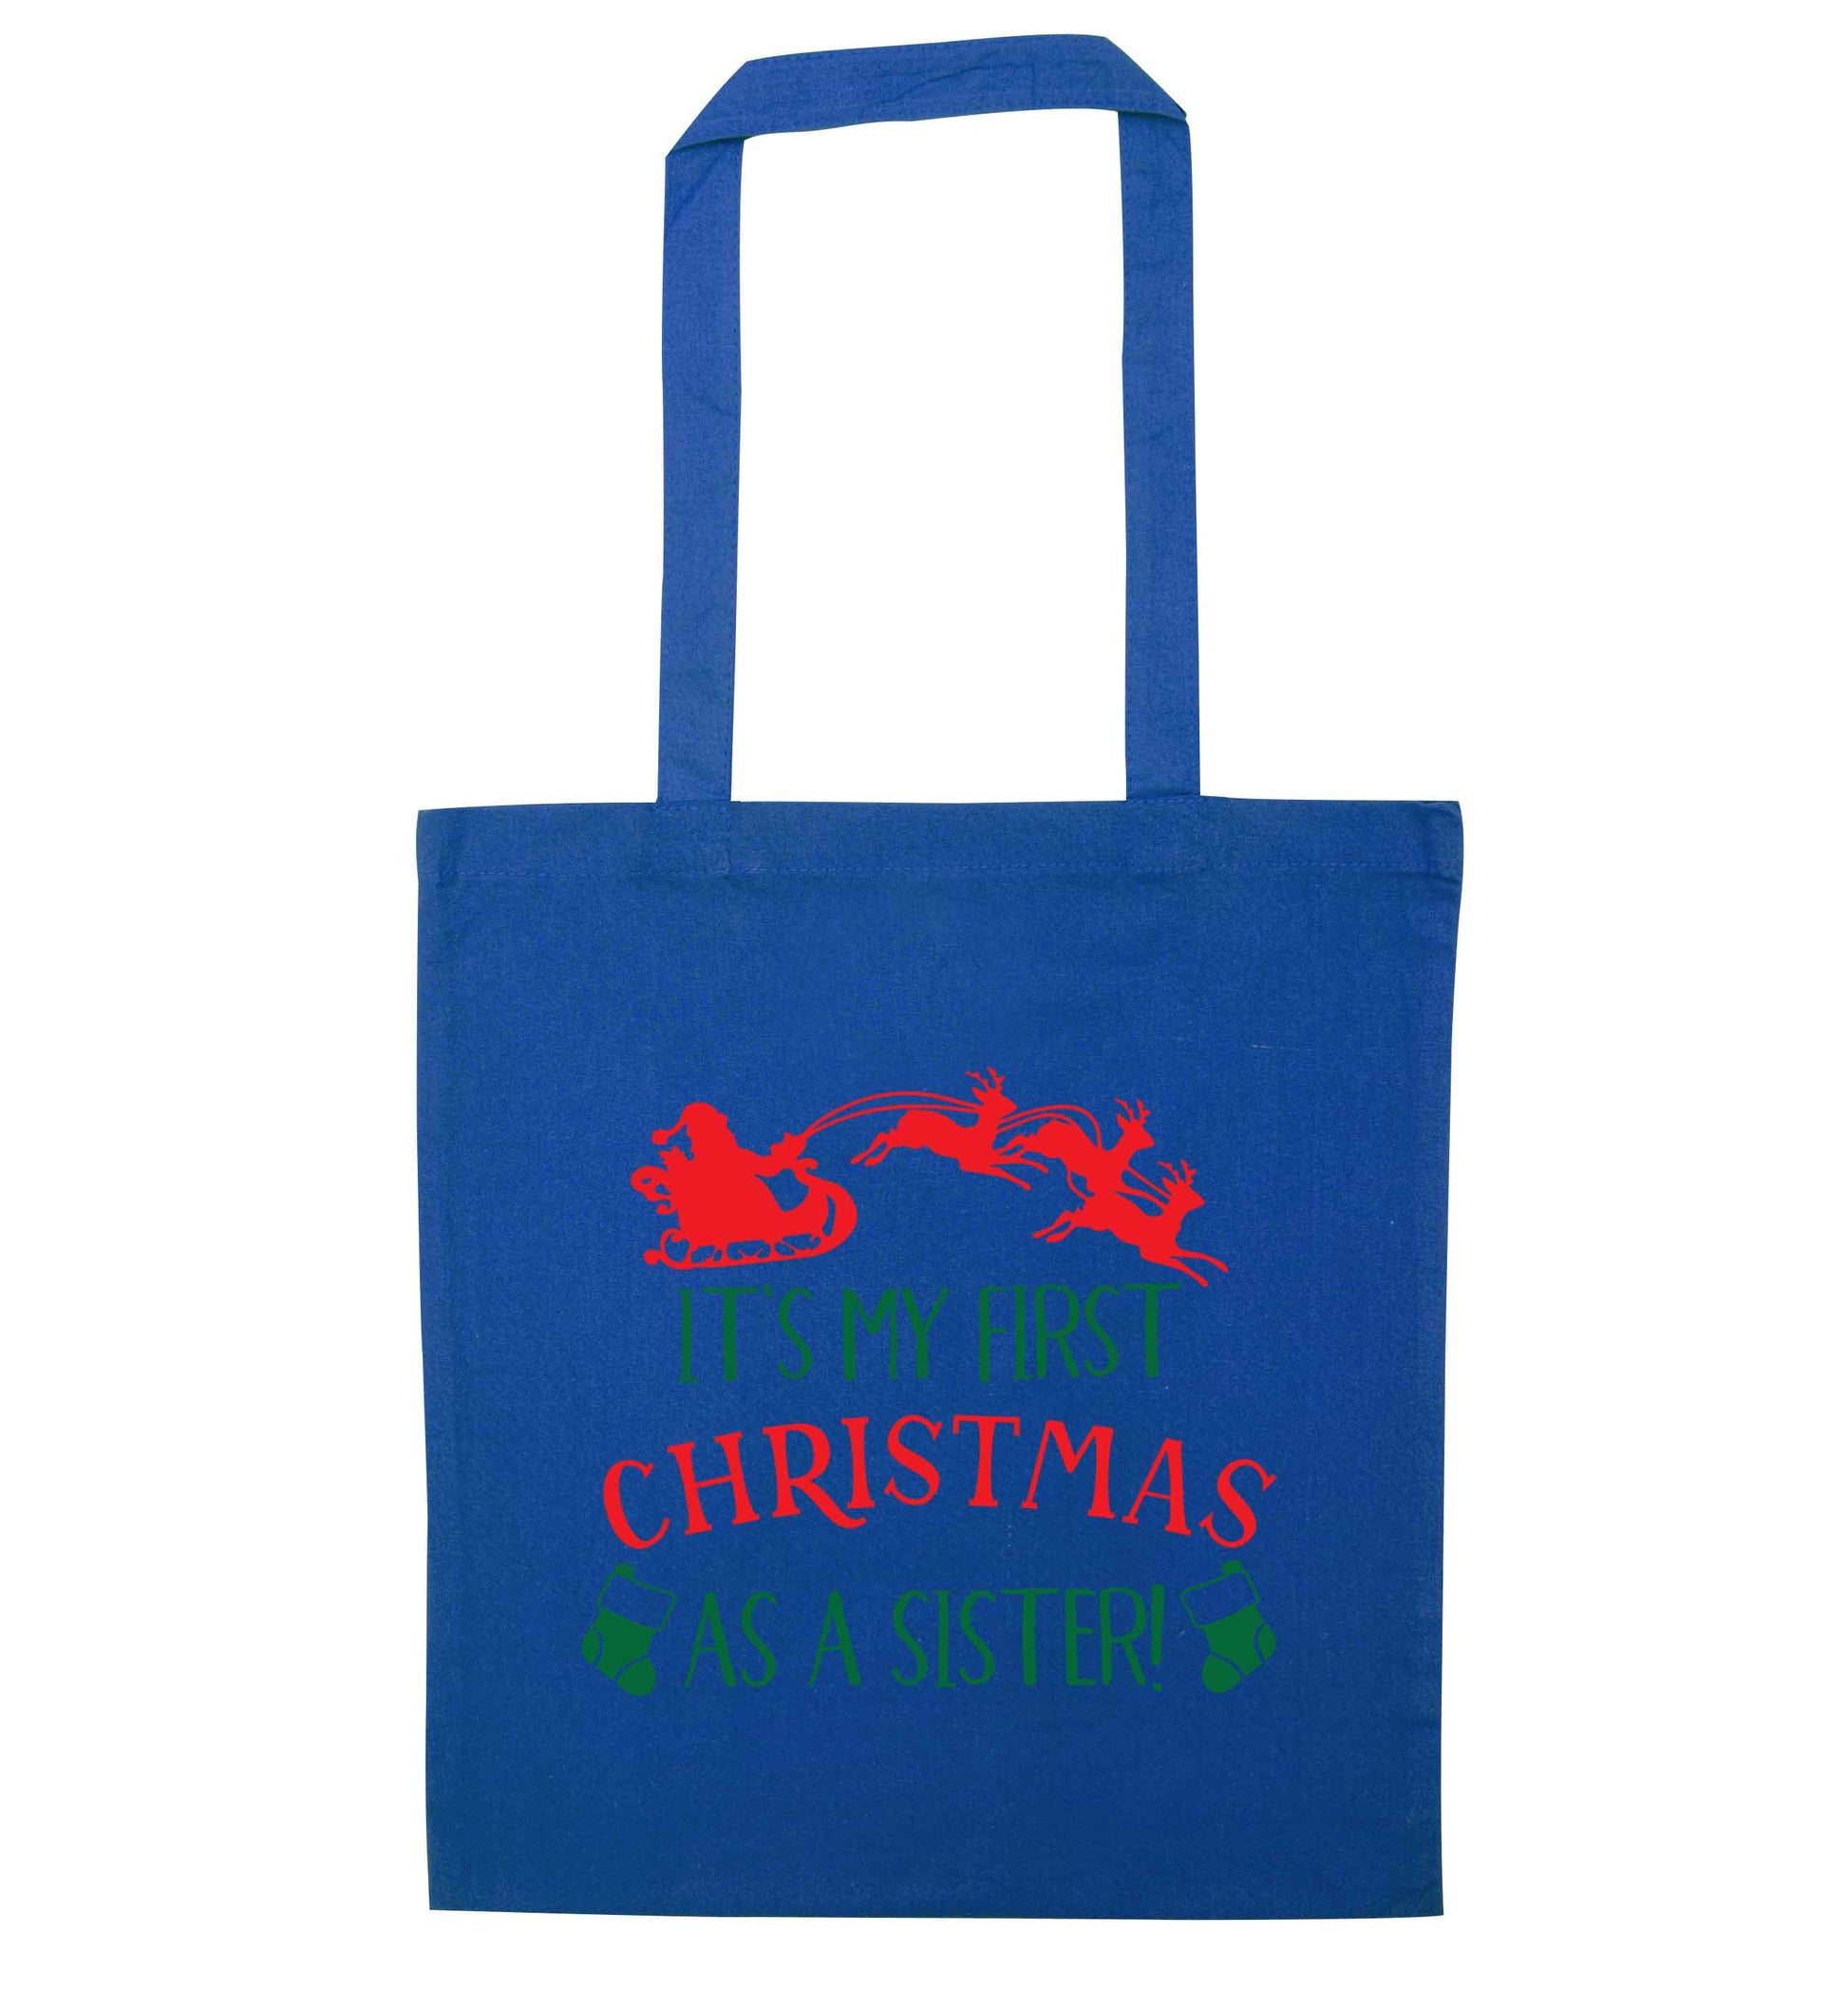 It's my first Christmas as a sister! blue tote bag